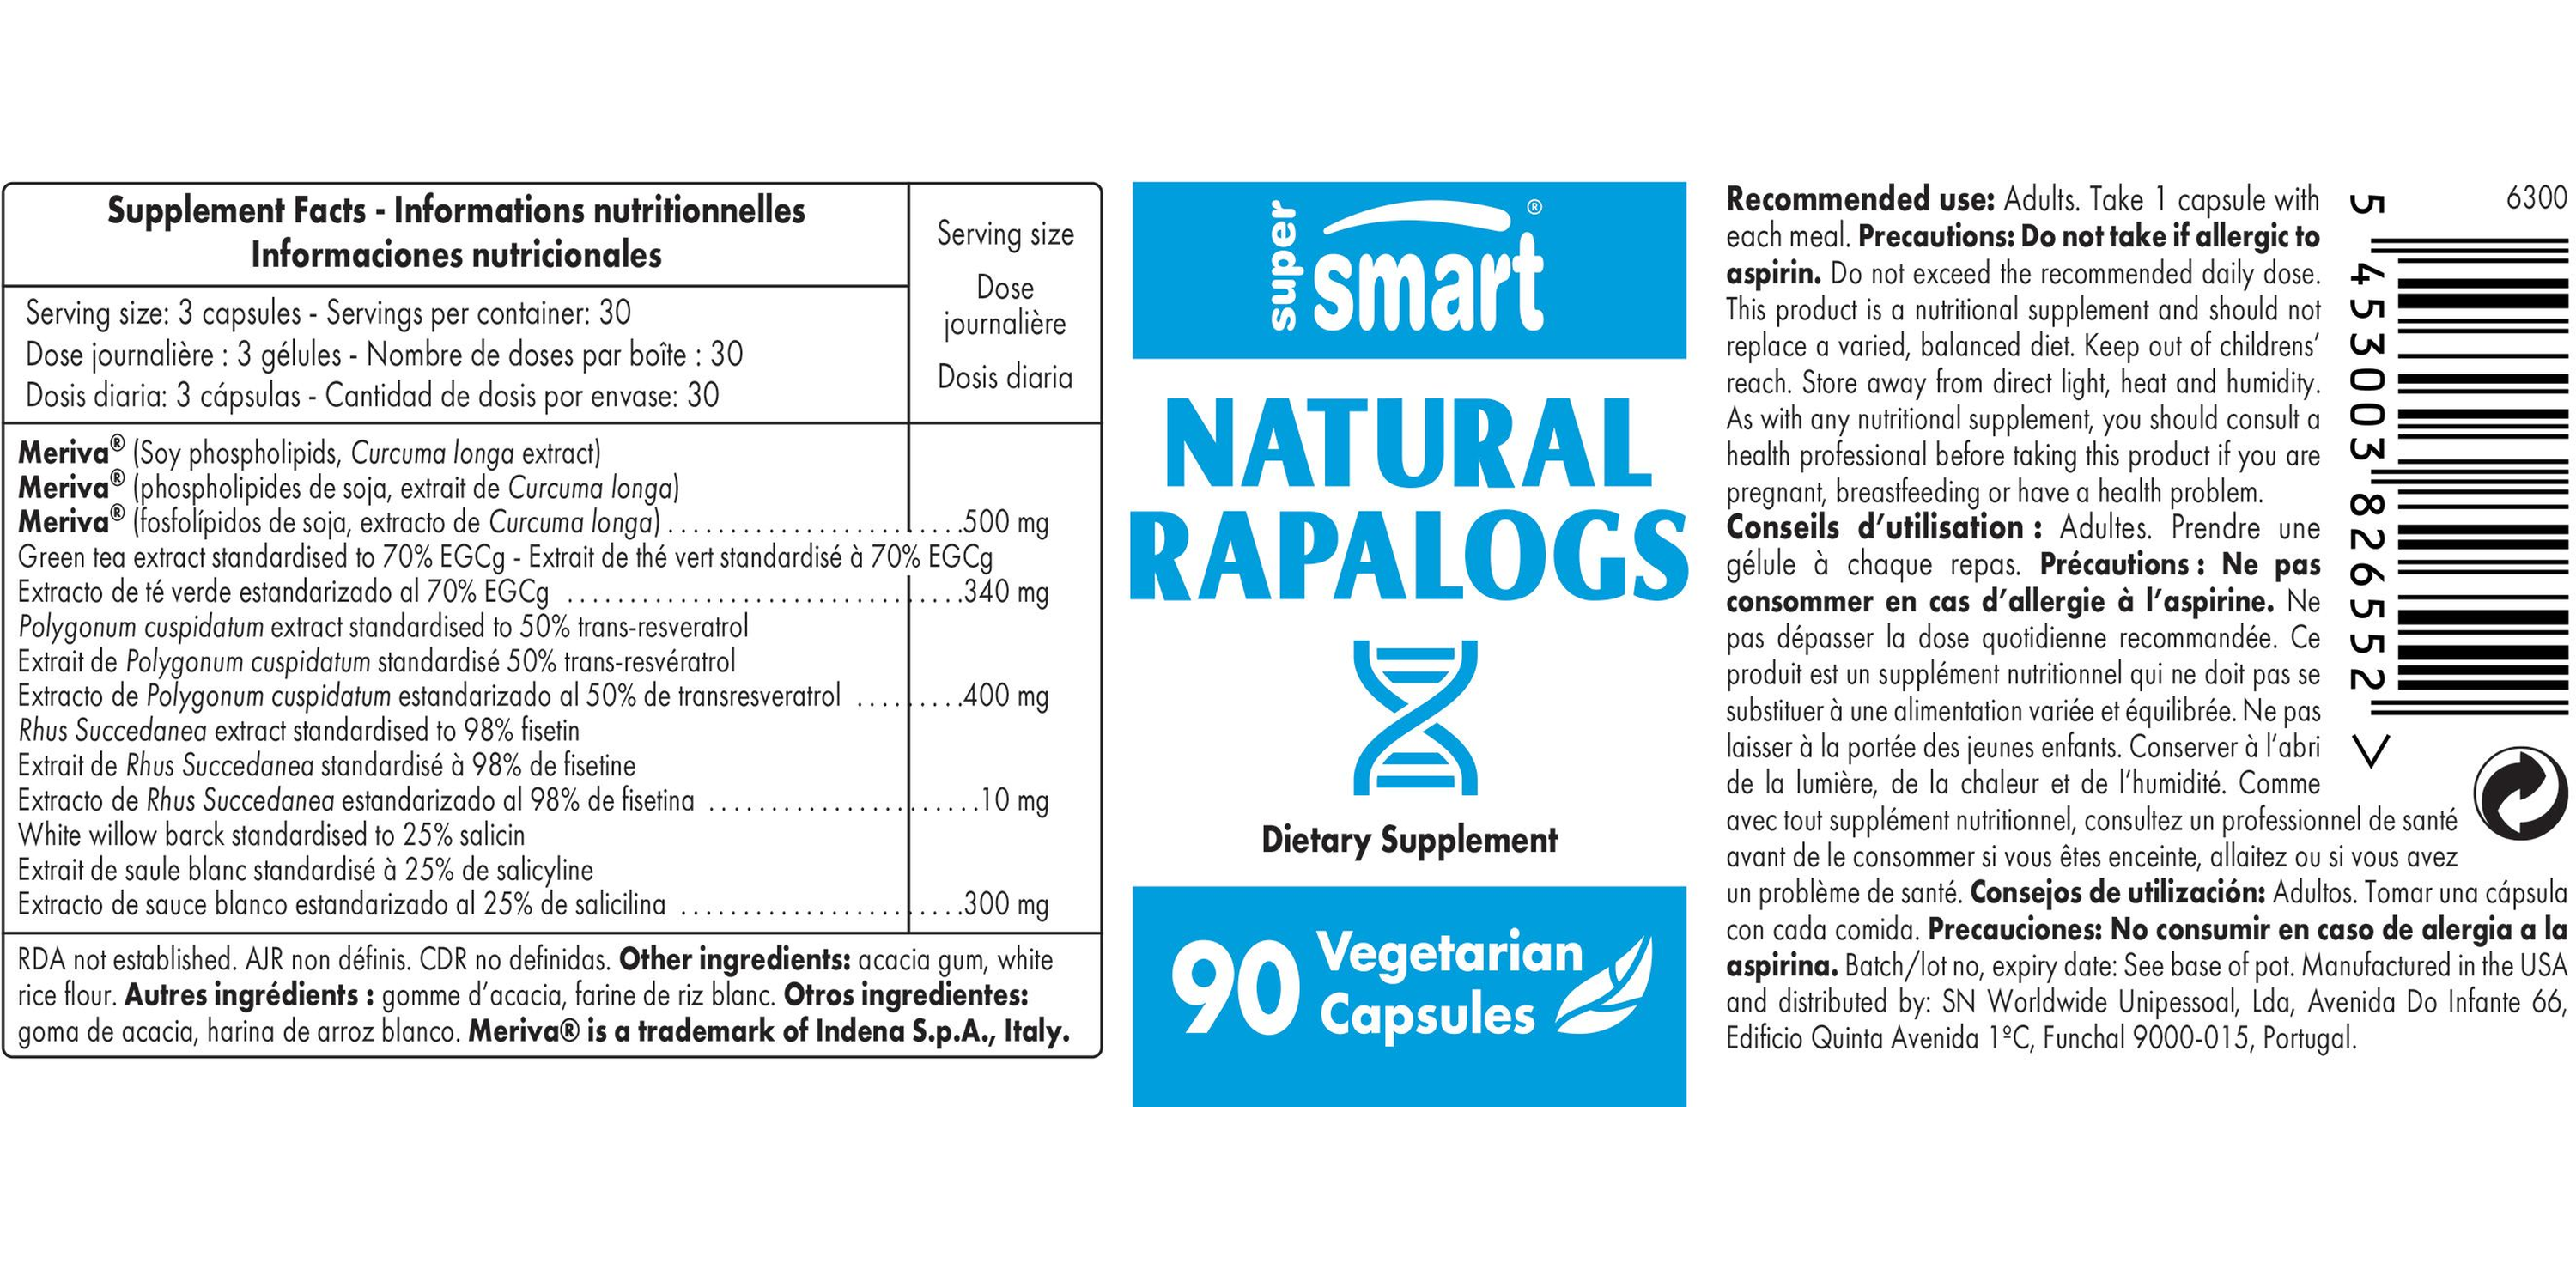 Natural Rapalogs Supplement